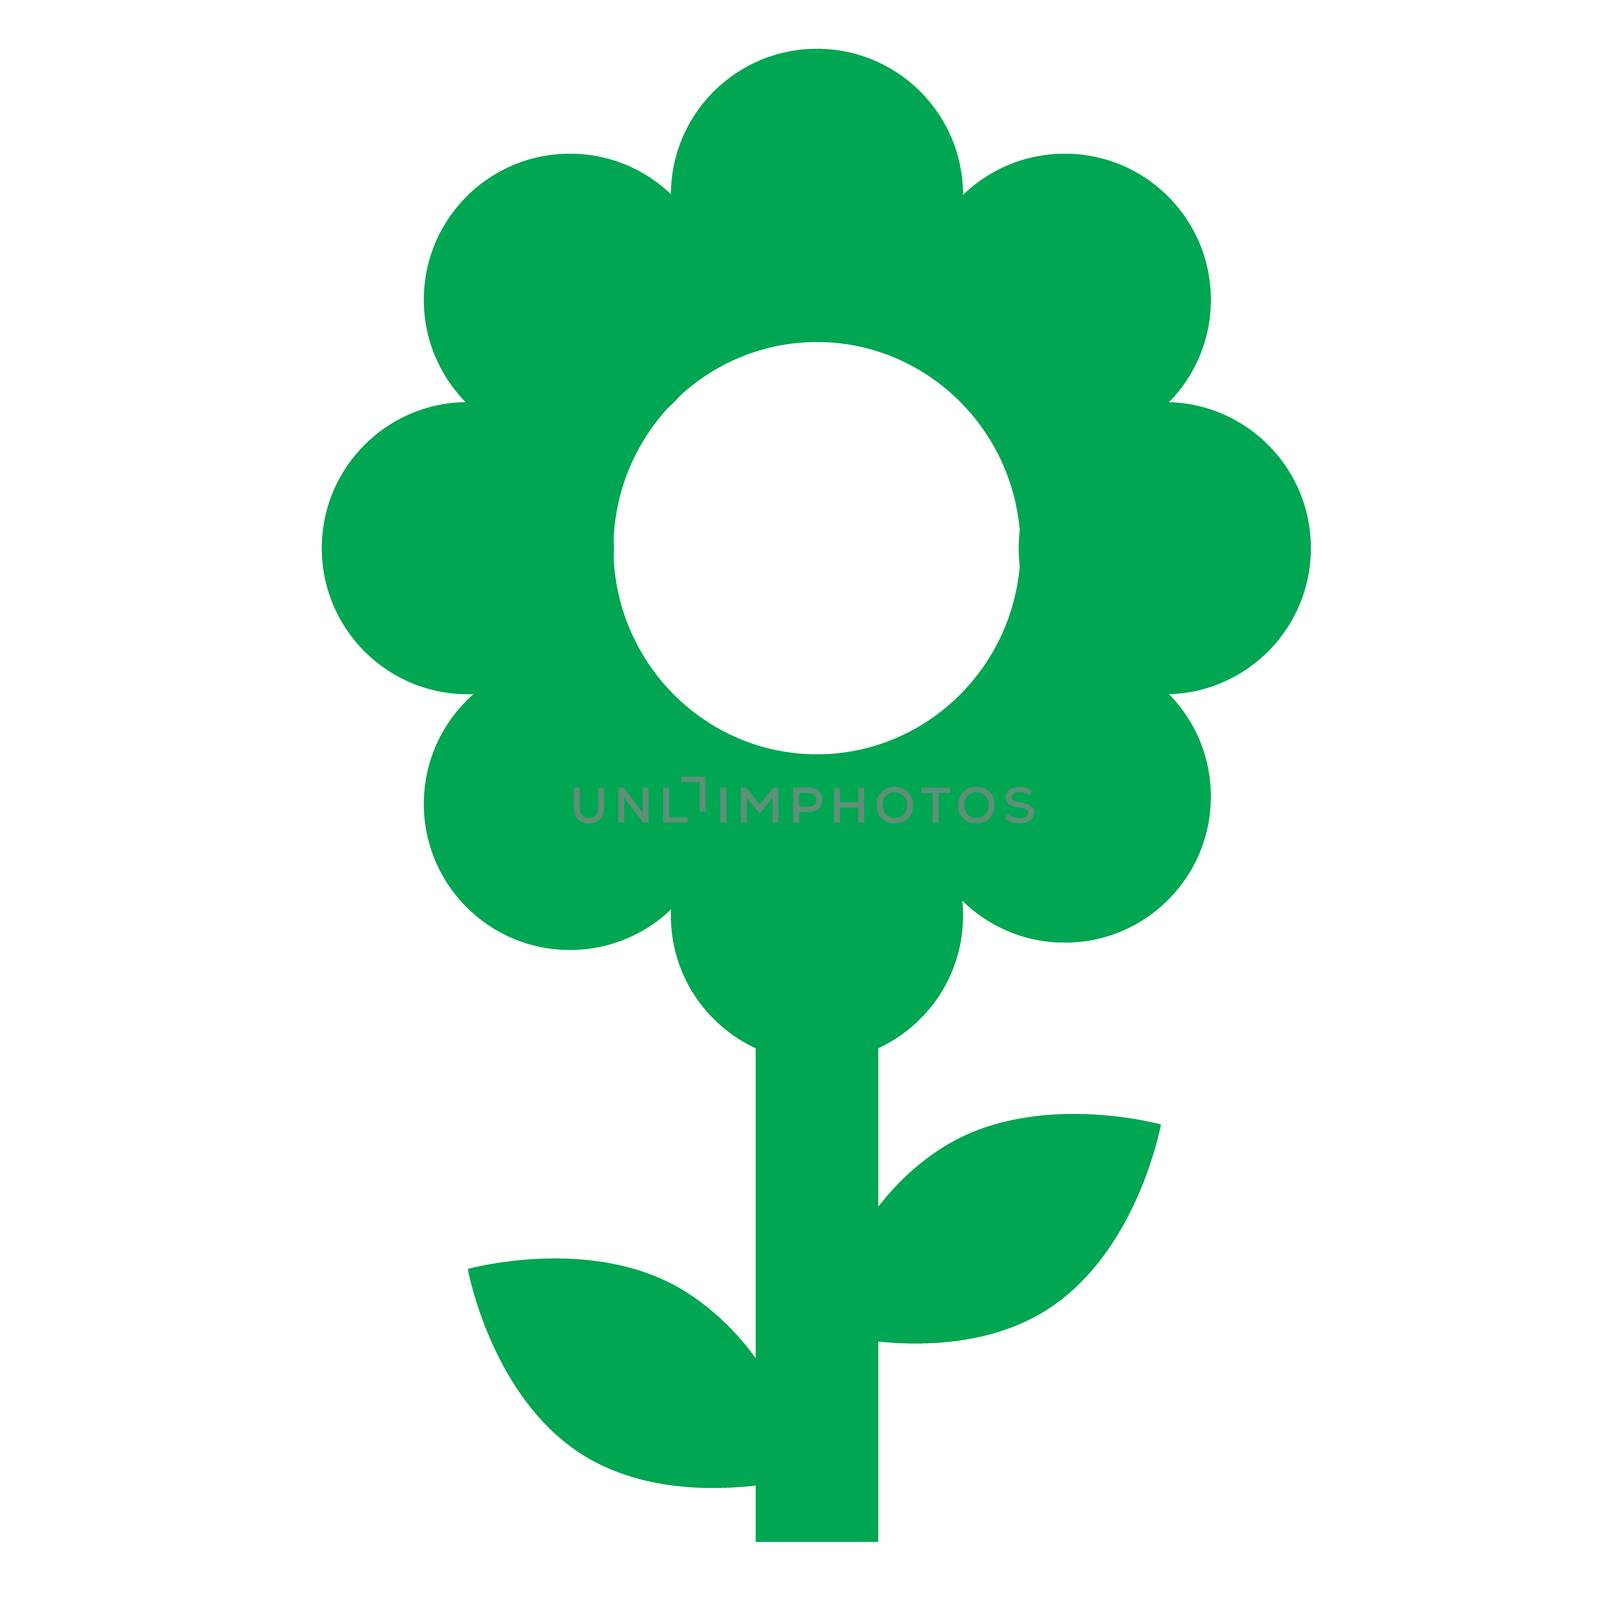 flower icon on white background. flat style. flower sign for your web site design, logo, app, UI. green flower symbol.